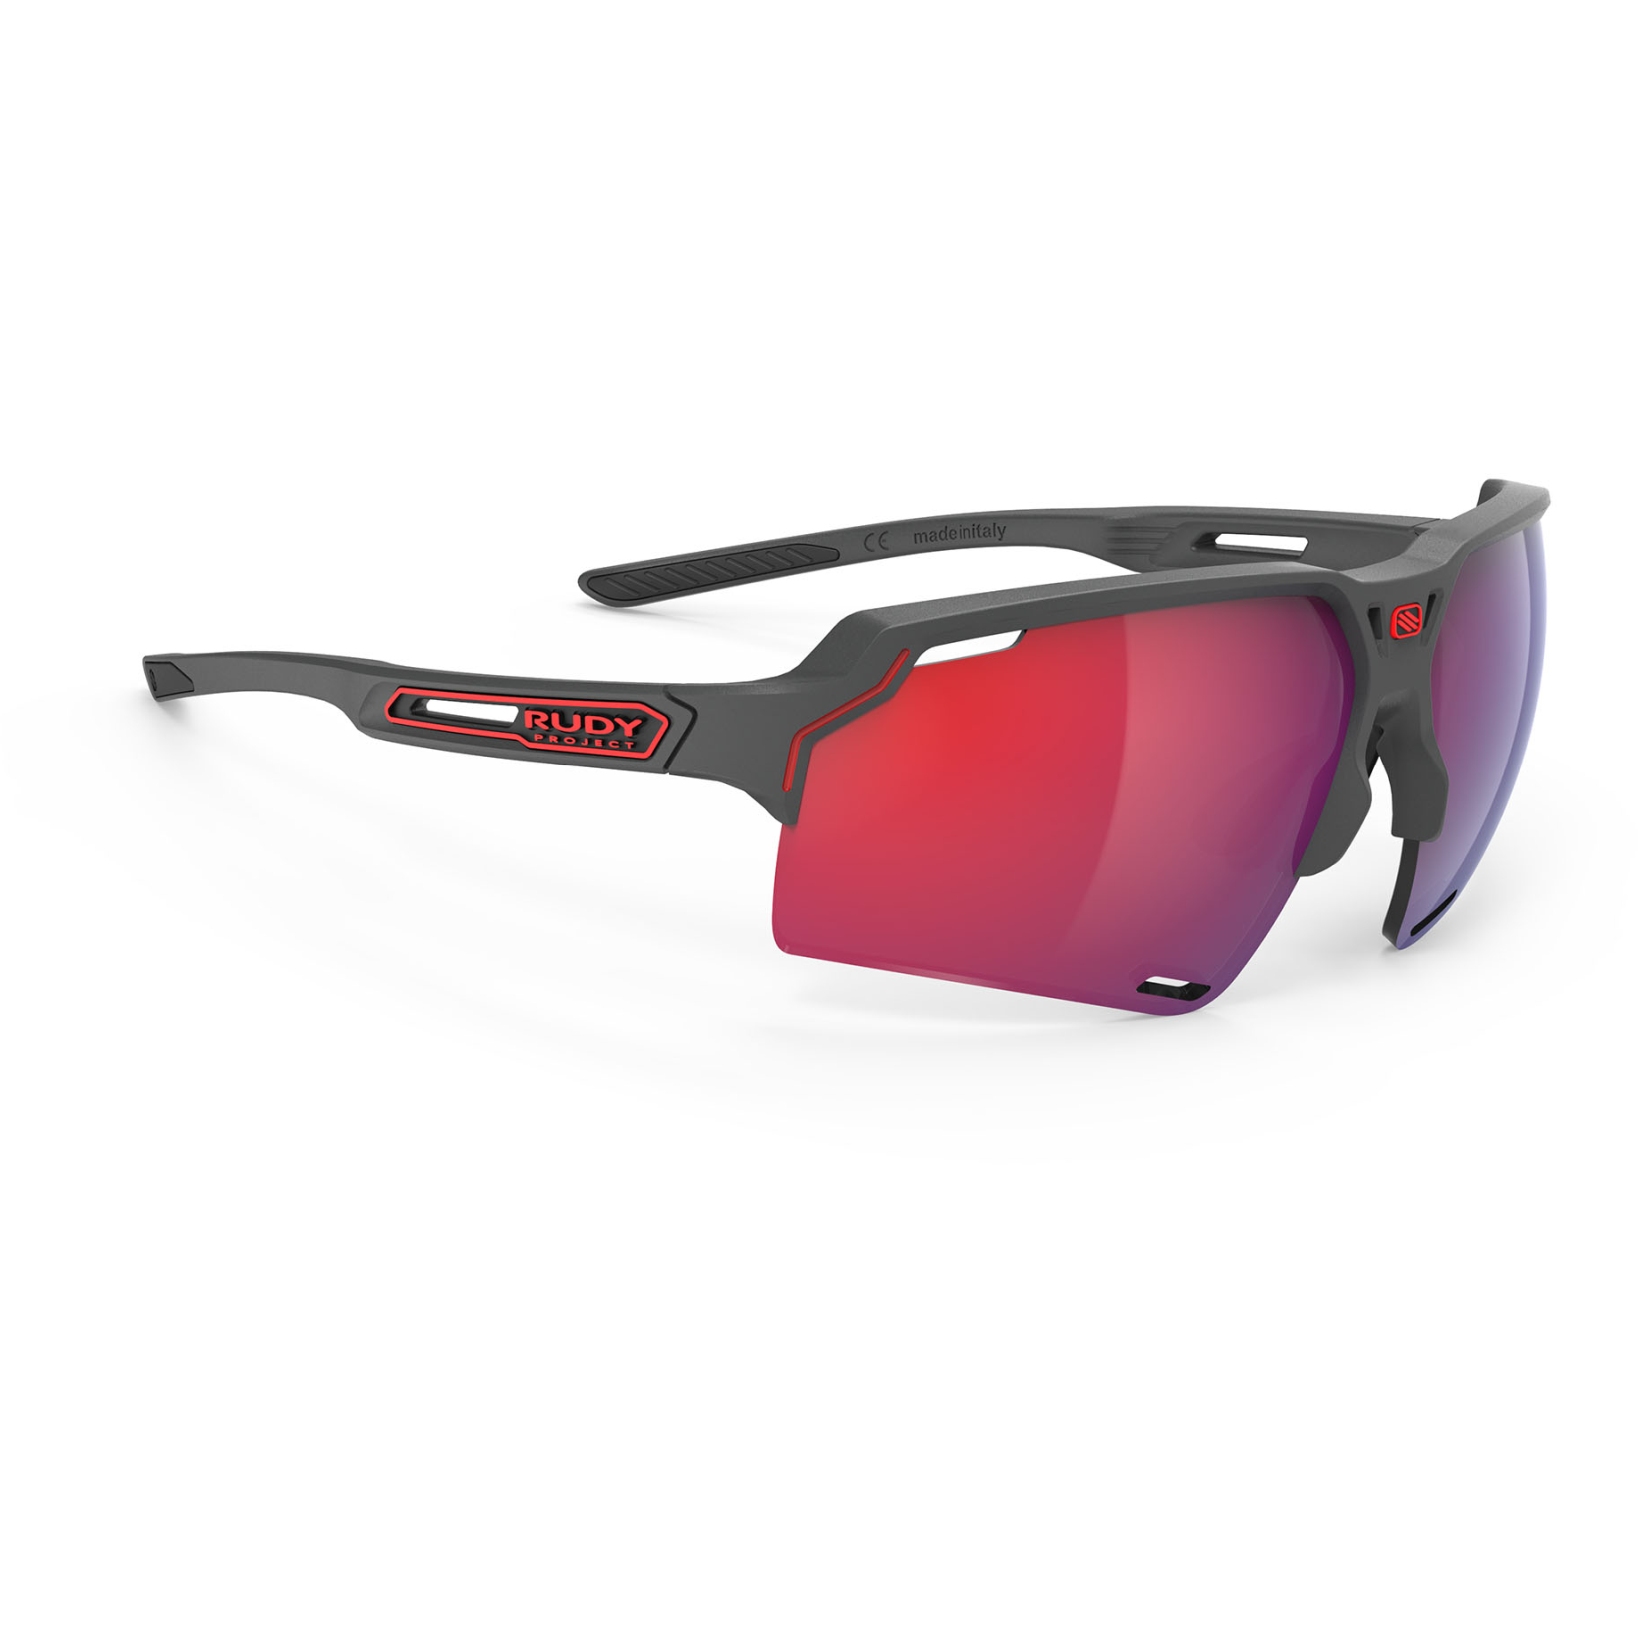 Image of Rudy Project Deltabeat Glasses - Charcoal Matte/Multilaser Red